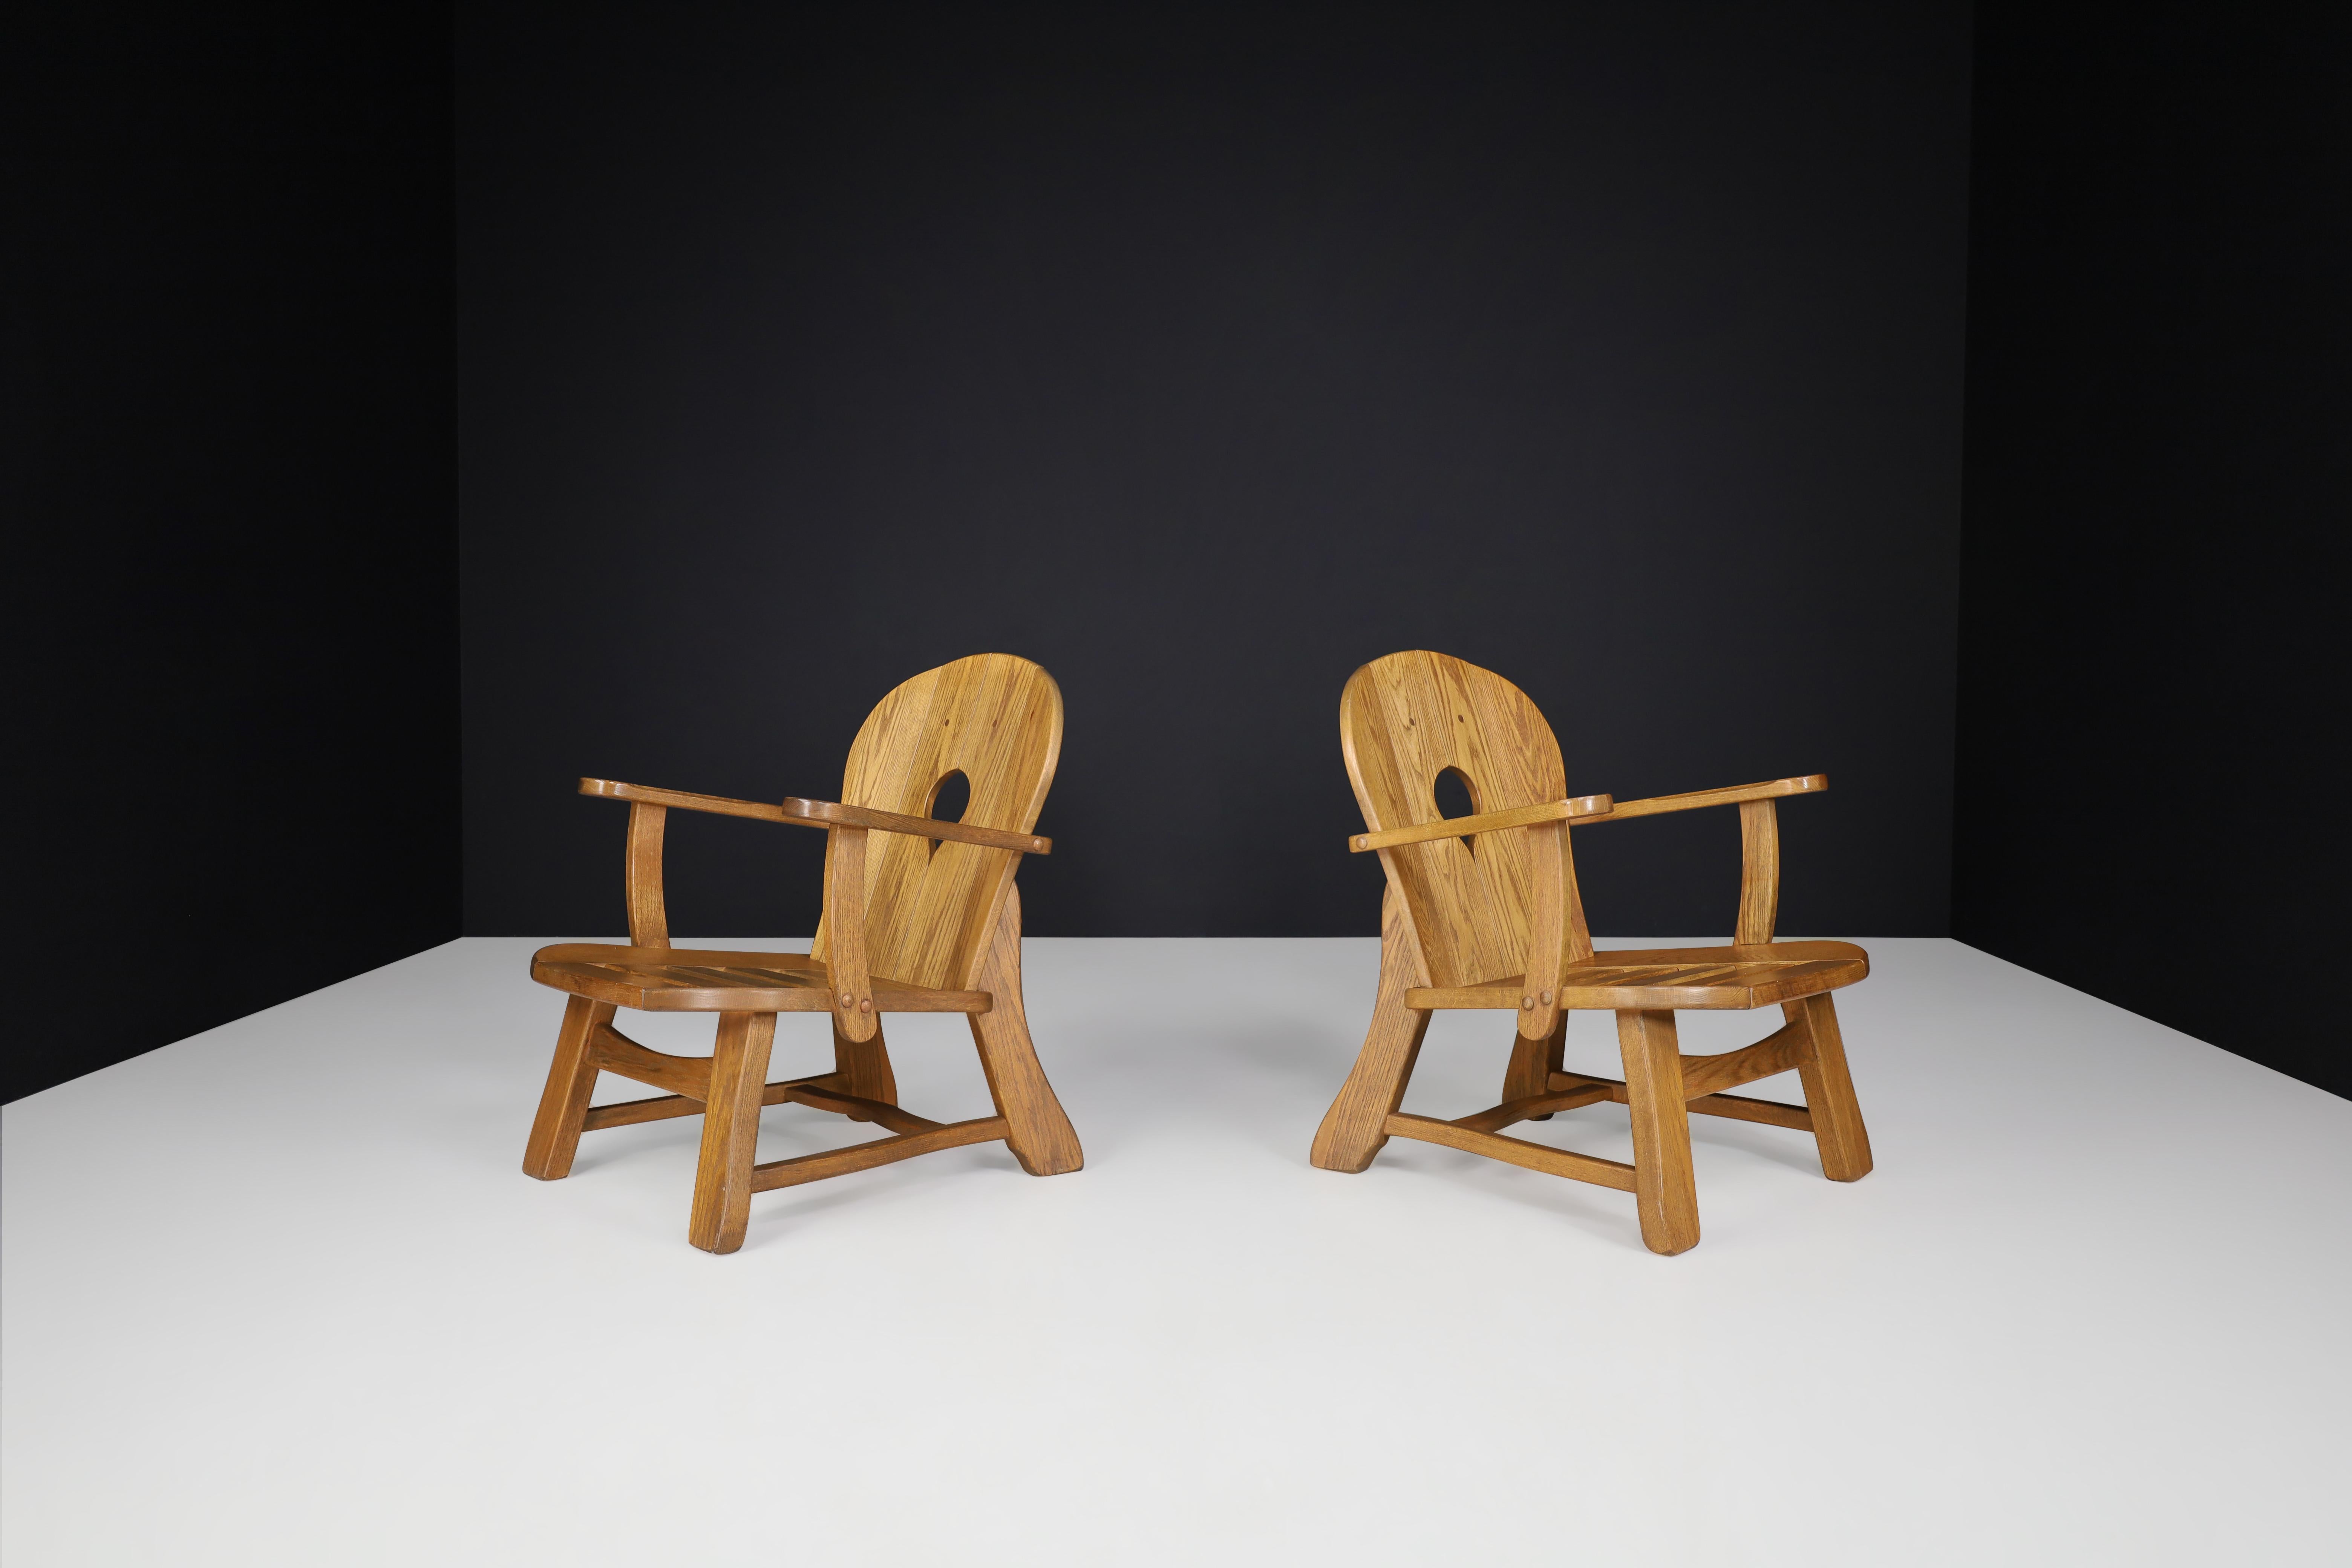 Set of two sculptural lounge chairs in oak, France, 1960s.

Set of two sculptural armchairs, these chairs are made of French oak and sculpturally crafted by hand in France in the 1960s. The craftsmanship is still visible; they are made of solid